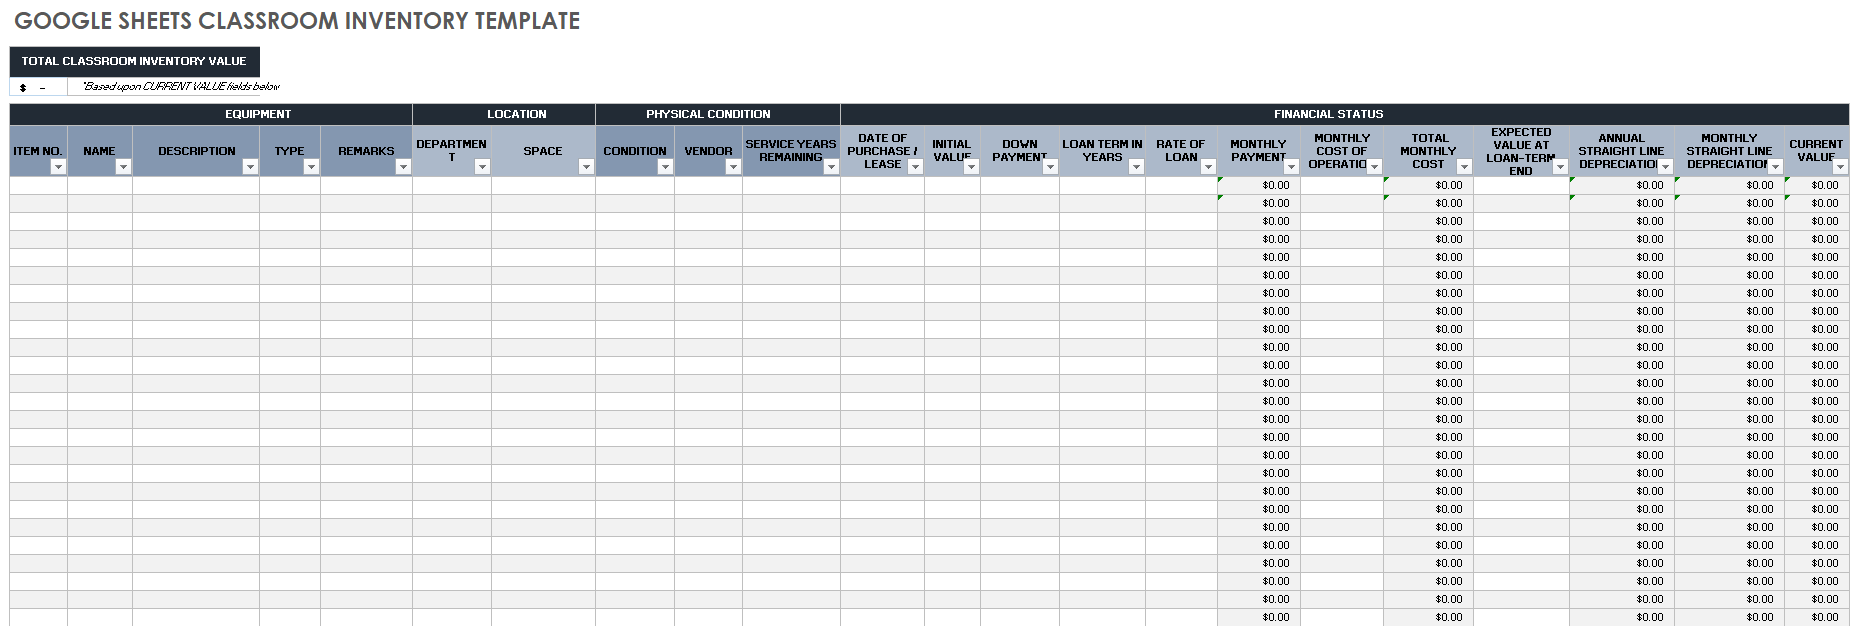 Classroom Inventory Template